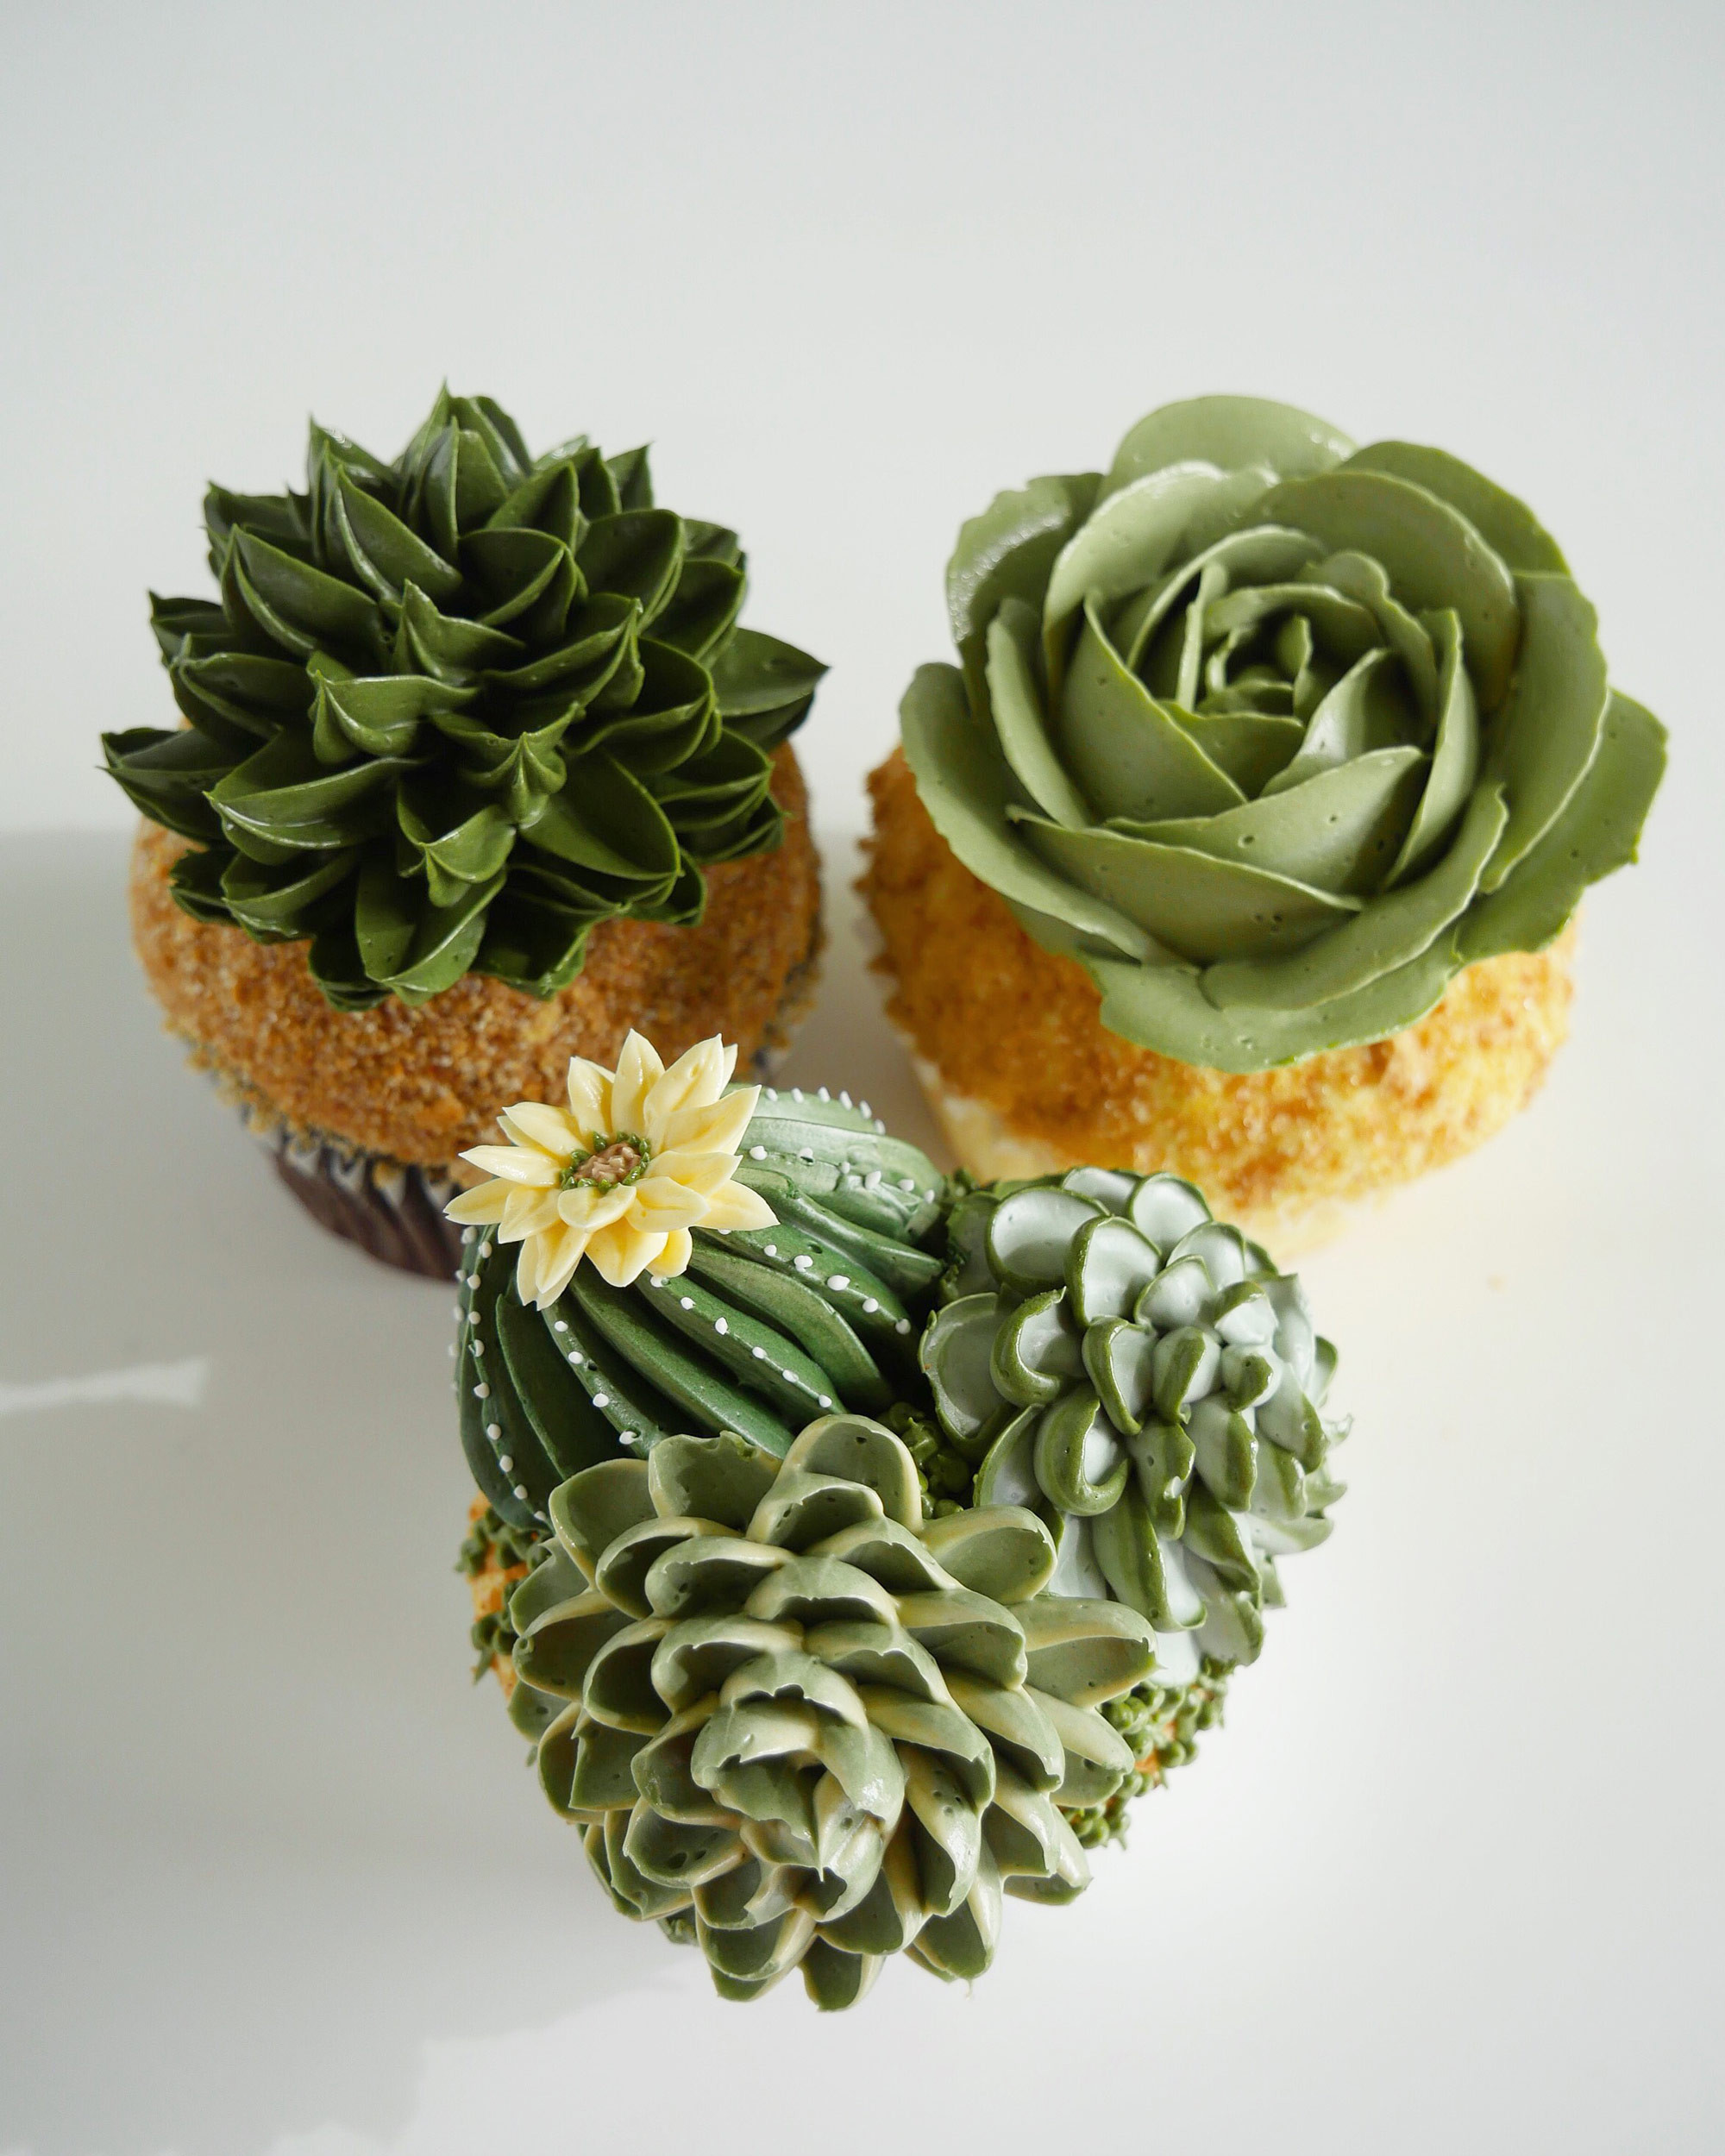 23 Fabulous Artificial Flowers In Vase Marks and Spencer 2024 free download artificial flowers in vase marks and spencer of buttercream succulents decorate edible planters by leslie vigil inside you can see more of vigils greenhouse inspired cakes on instagram via t